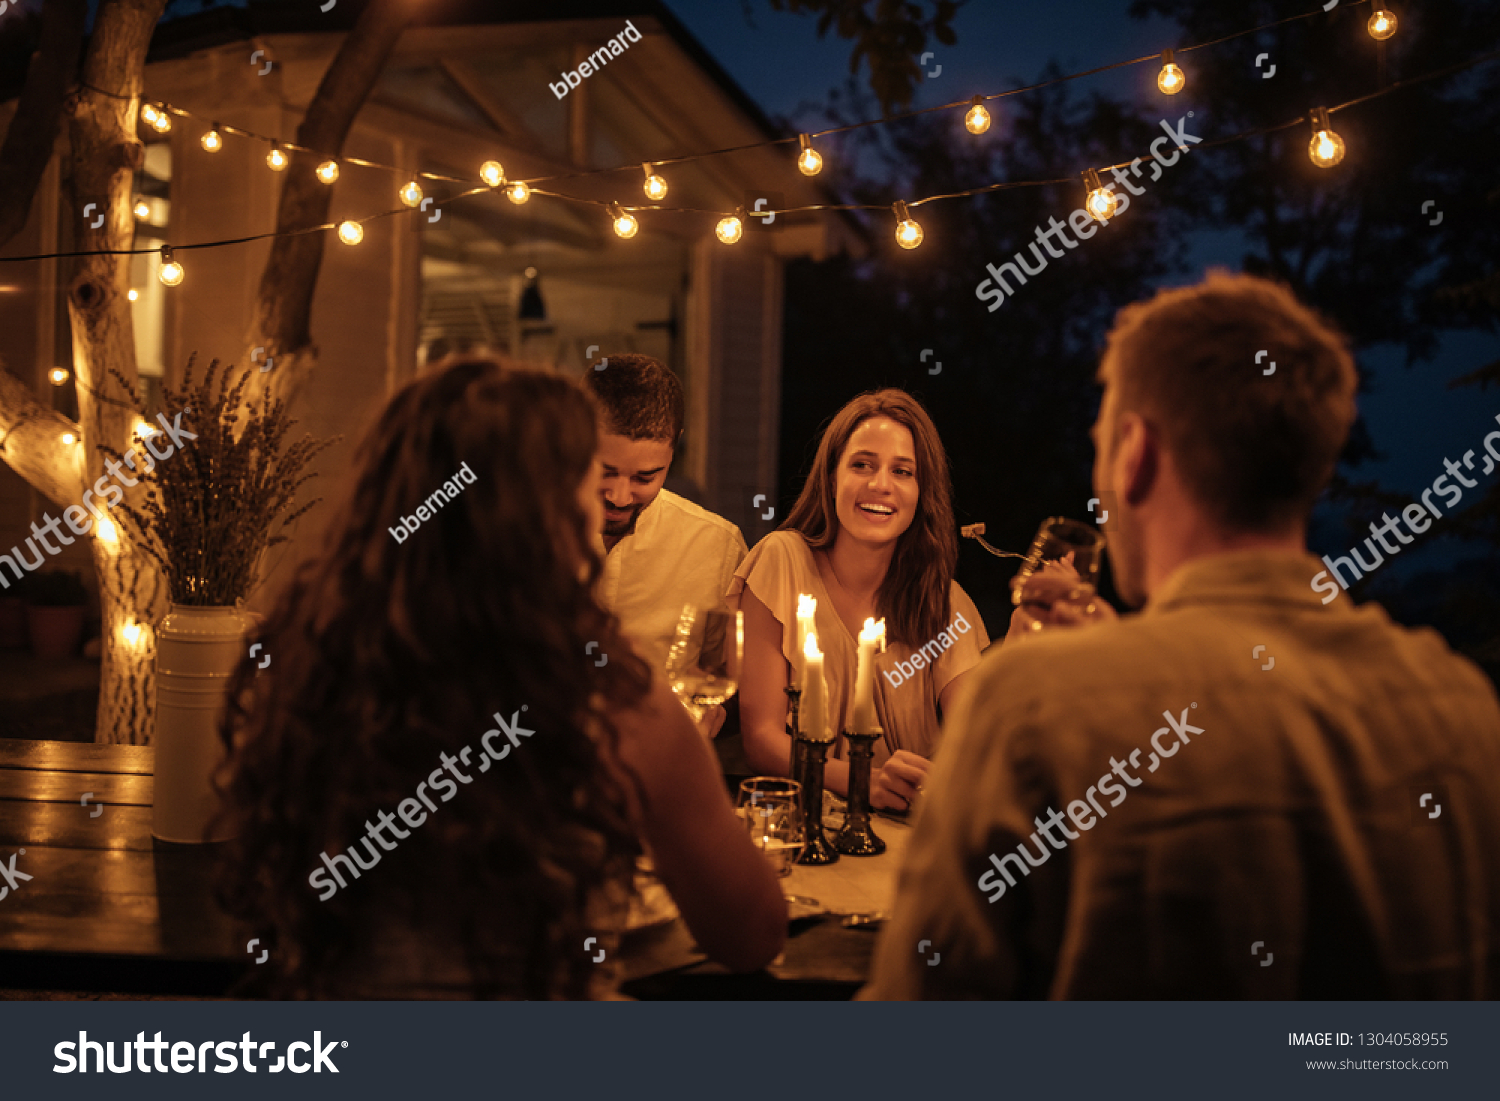 Shot of friends having fun at a dinner party in a backyard #1304058955